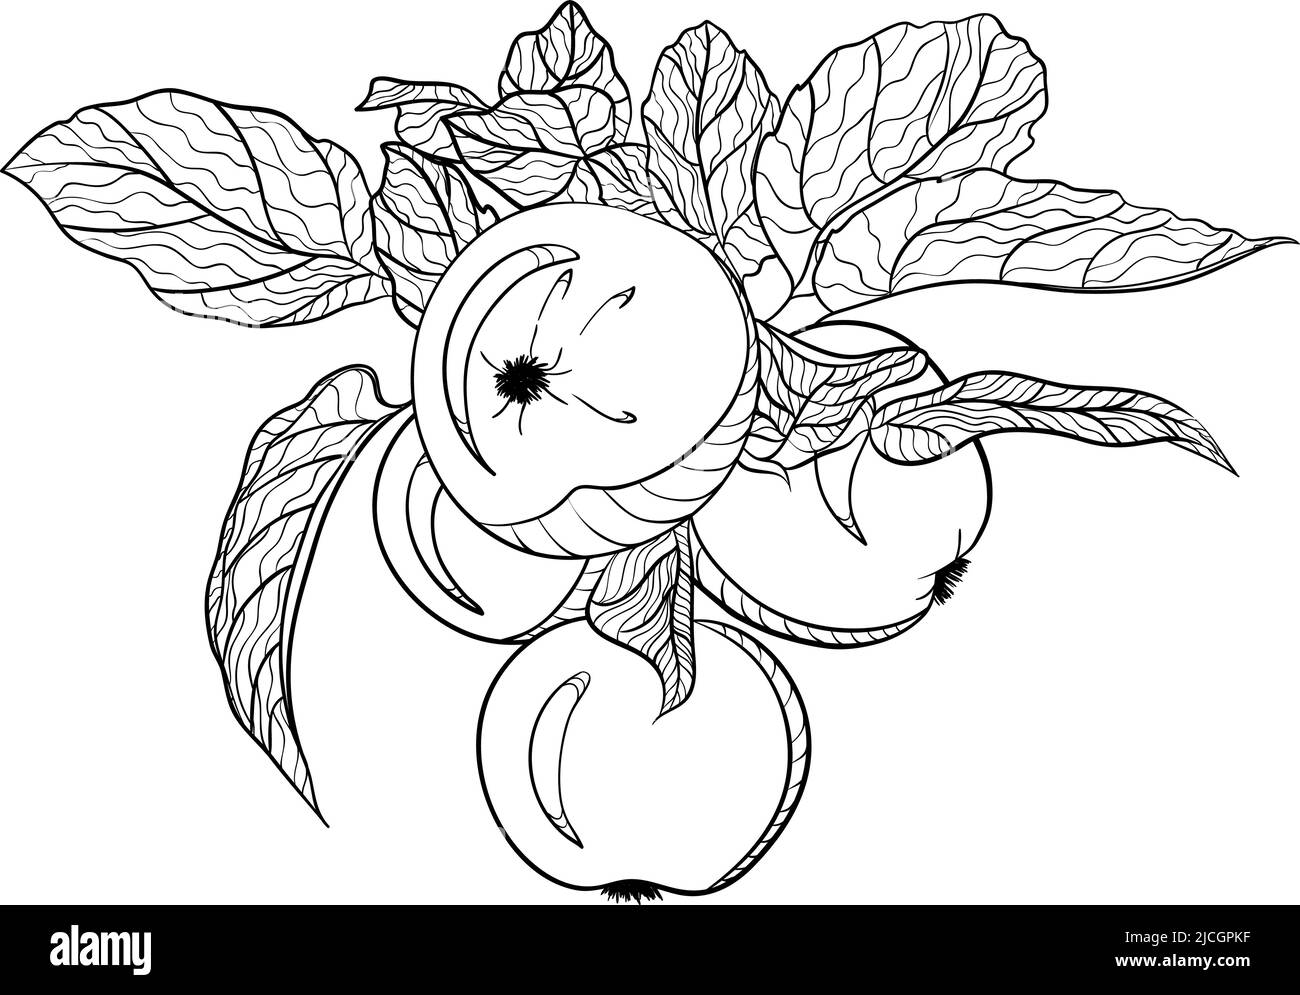 Branch with apples in doodle style Stock Vector